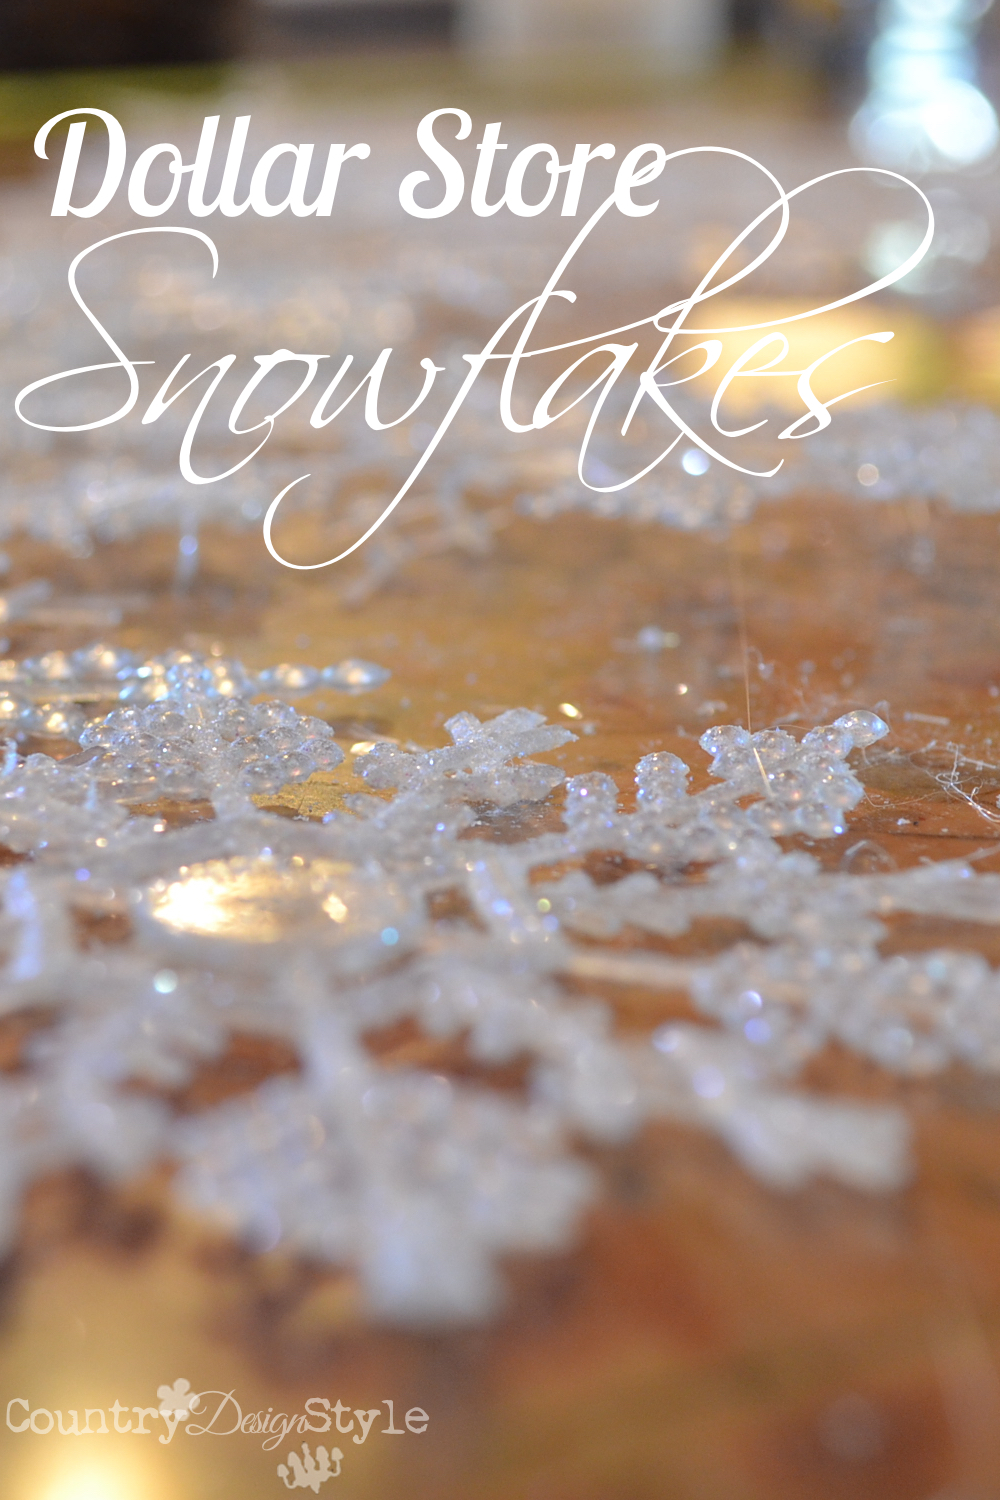 dollar-store-snowflakes-country-design-style-pn